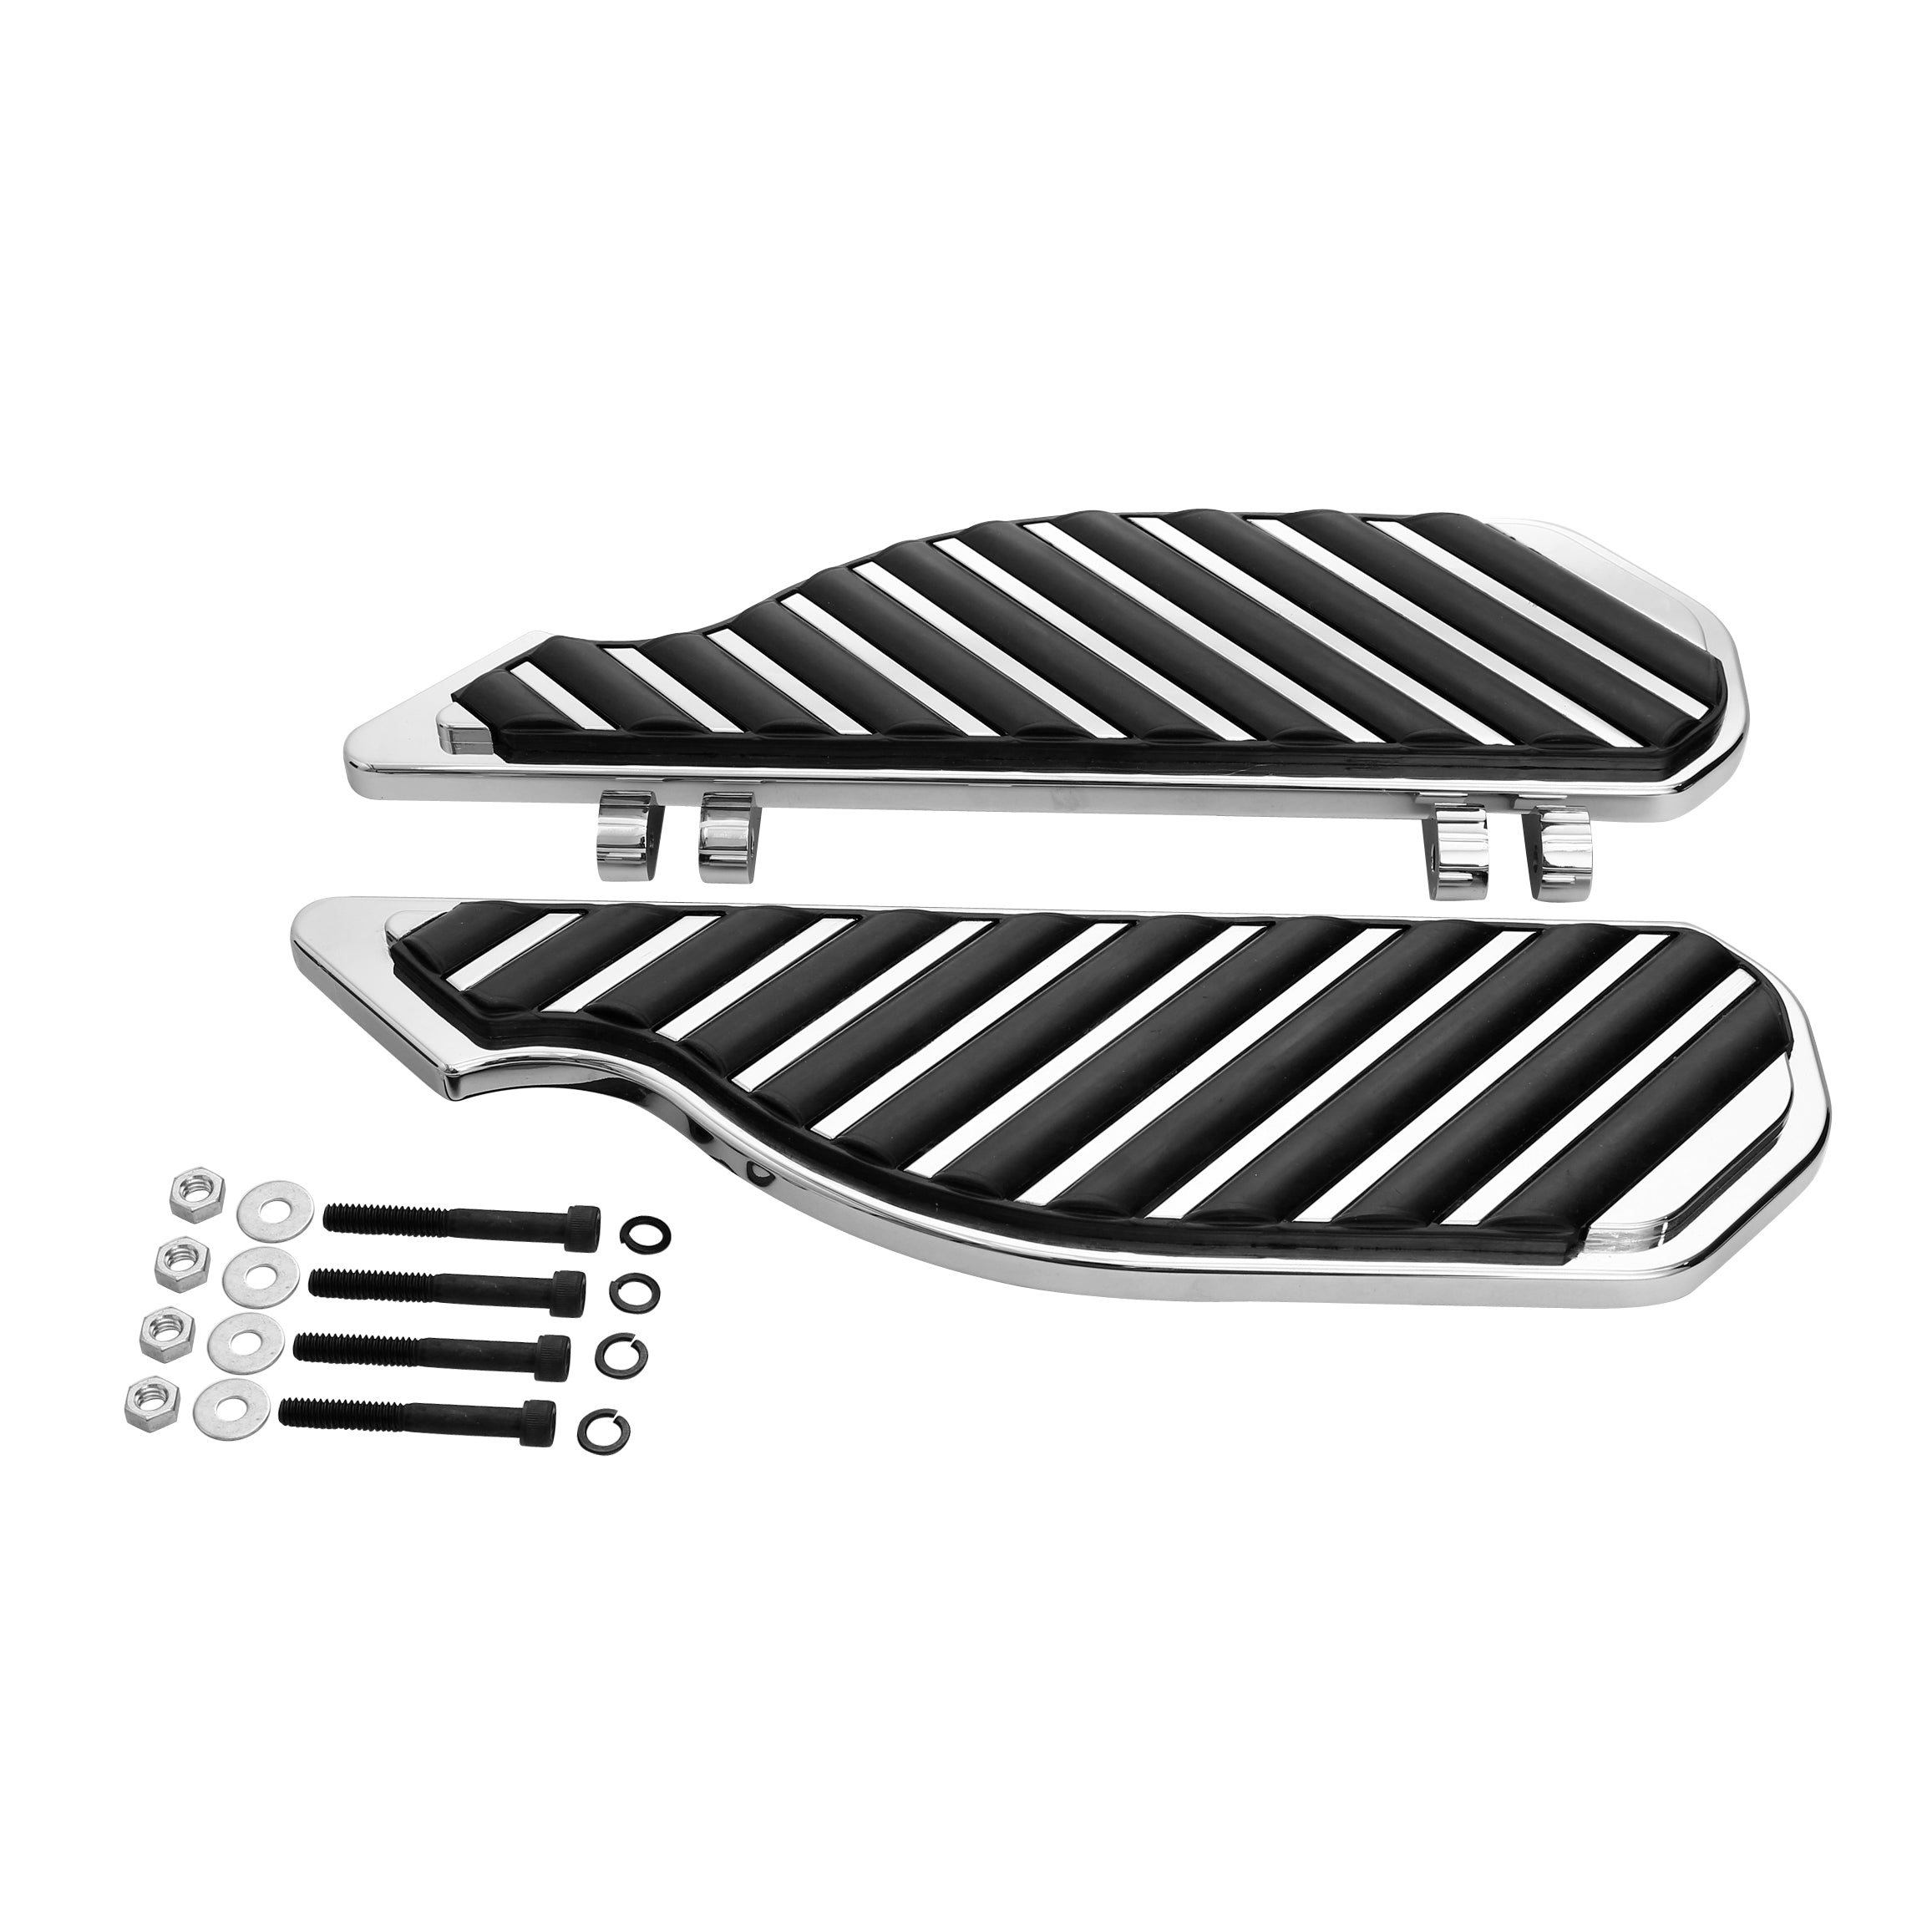 Tour Ease Chrome Black Rider Floorboards Footboard Fit For Harley Touring 86+Softail 86-17